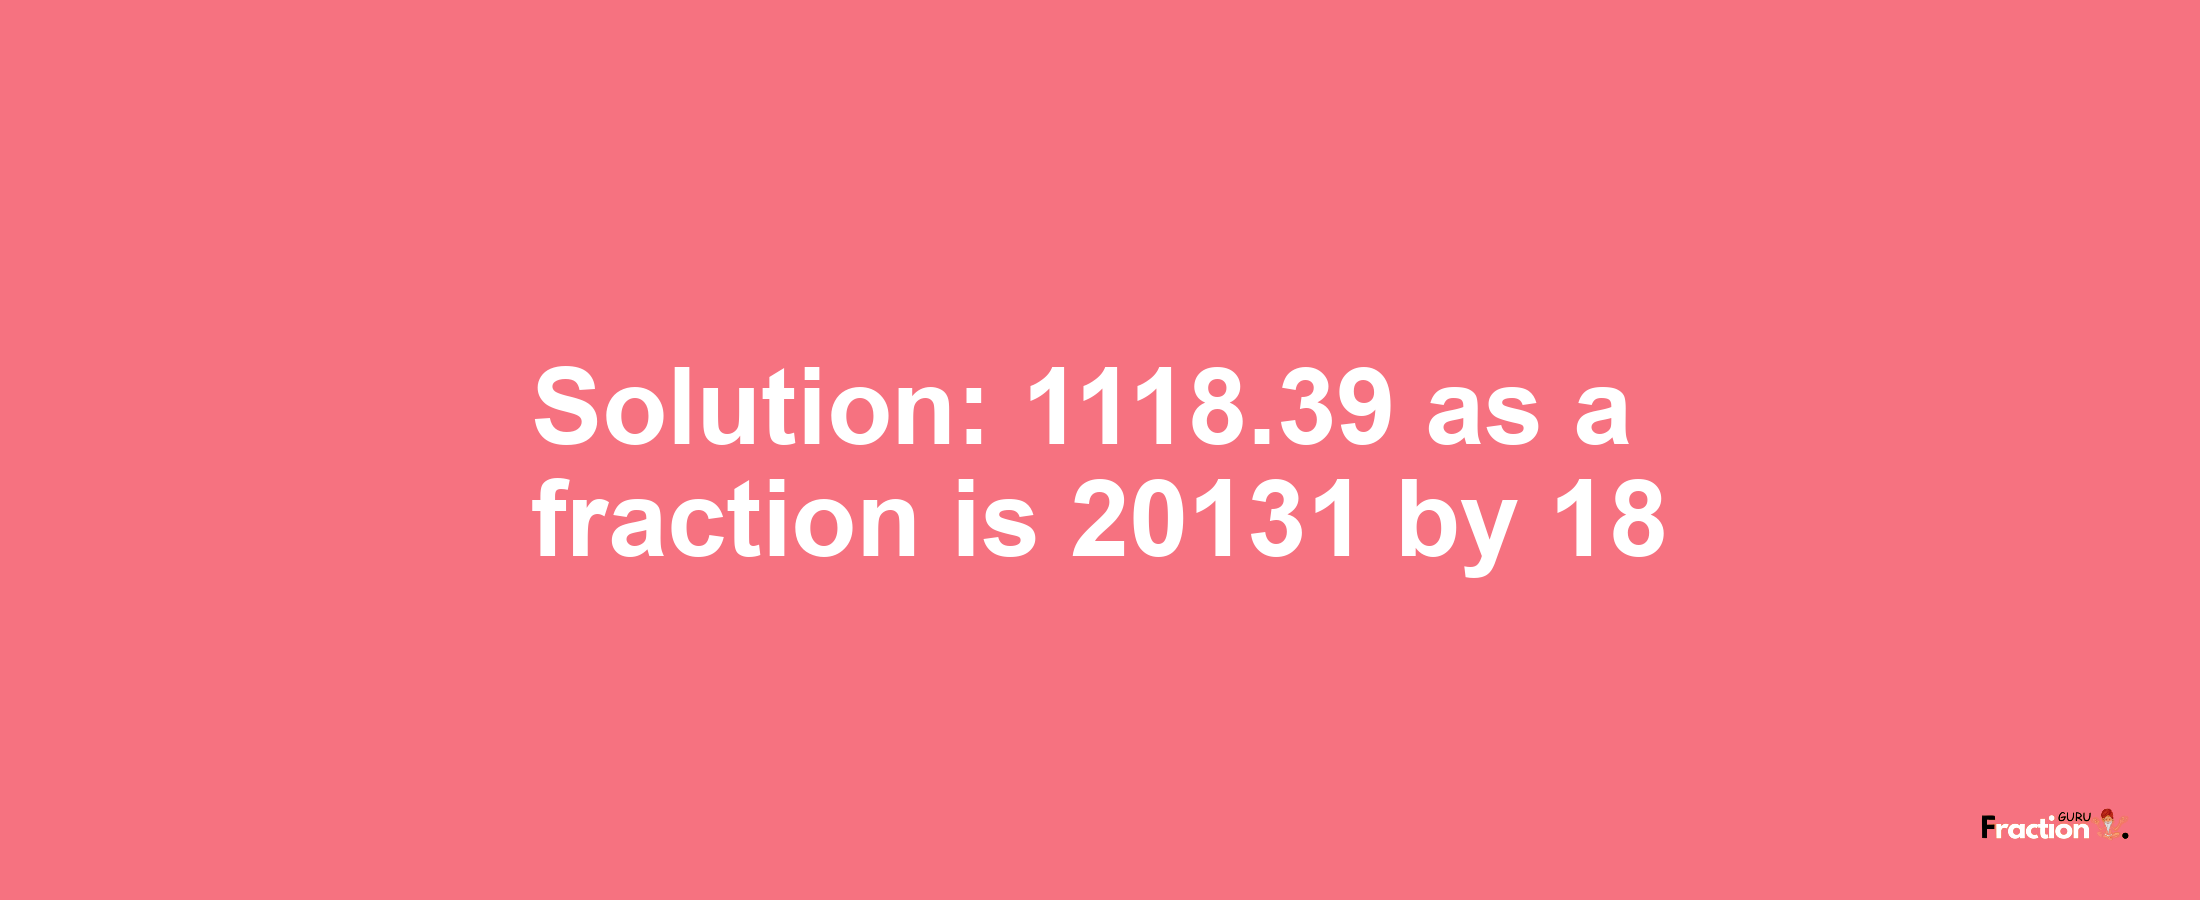 Solution:1118.39 as a fraction is 20131/18